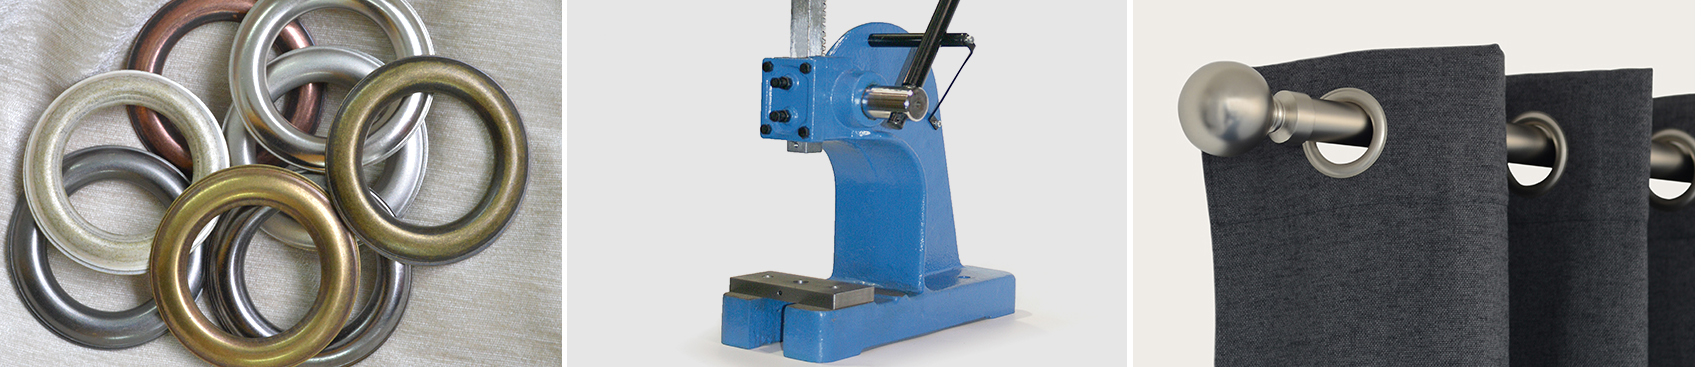 Eyelet Press & Tools - 66mm - 40mm - 5.5mm - Up to 56mm